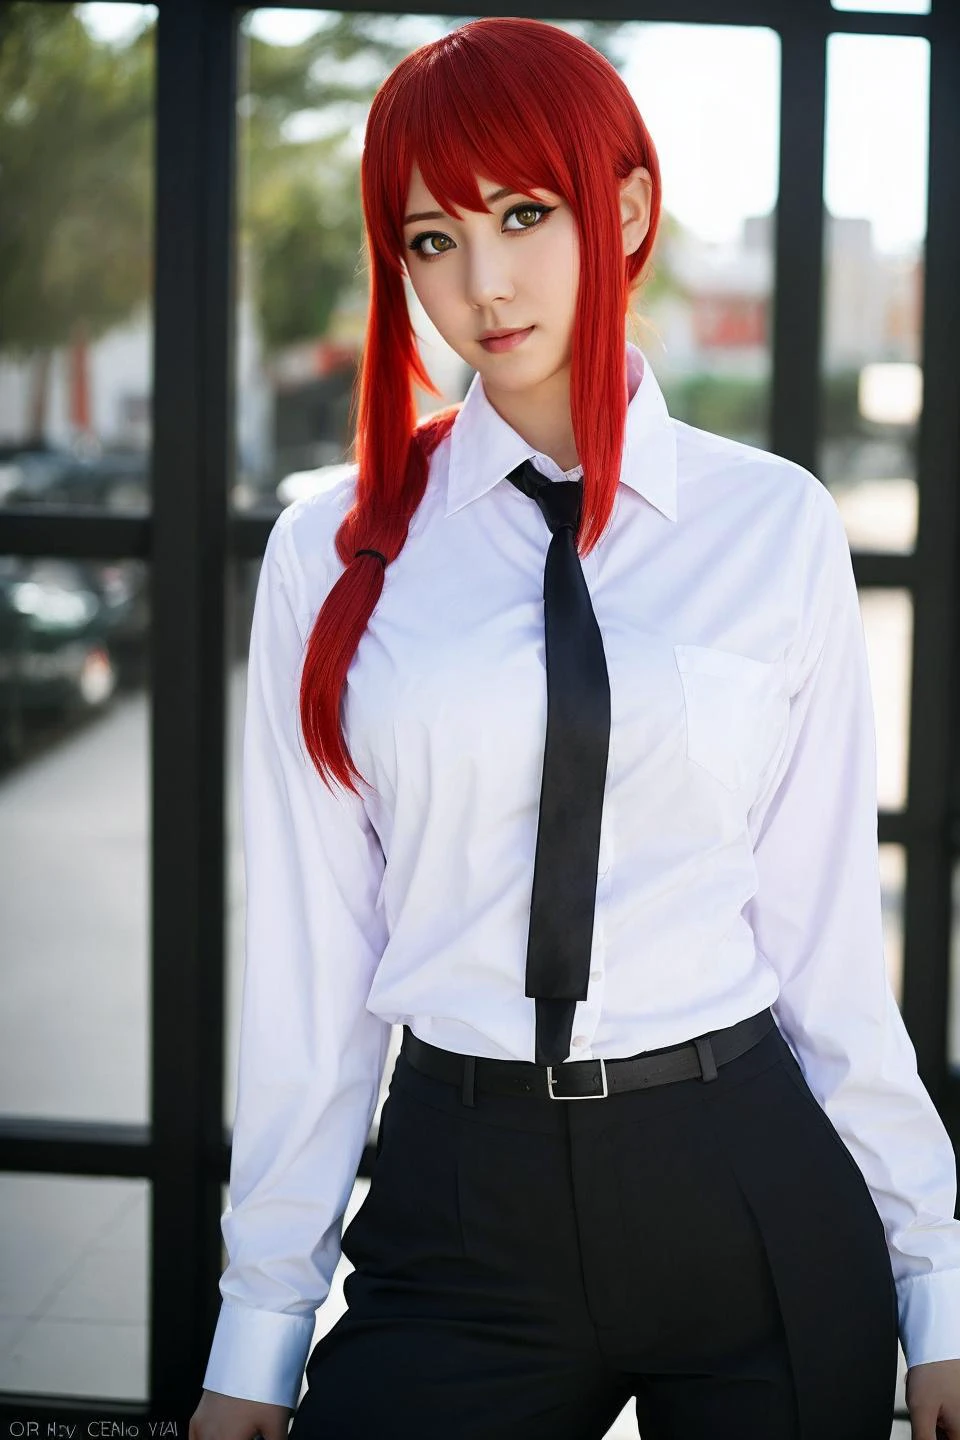 professional photo, portrait shot of a woman with red hair and a white shirt and black pants, tie, cosplay, looking at the viewer, hdr